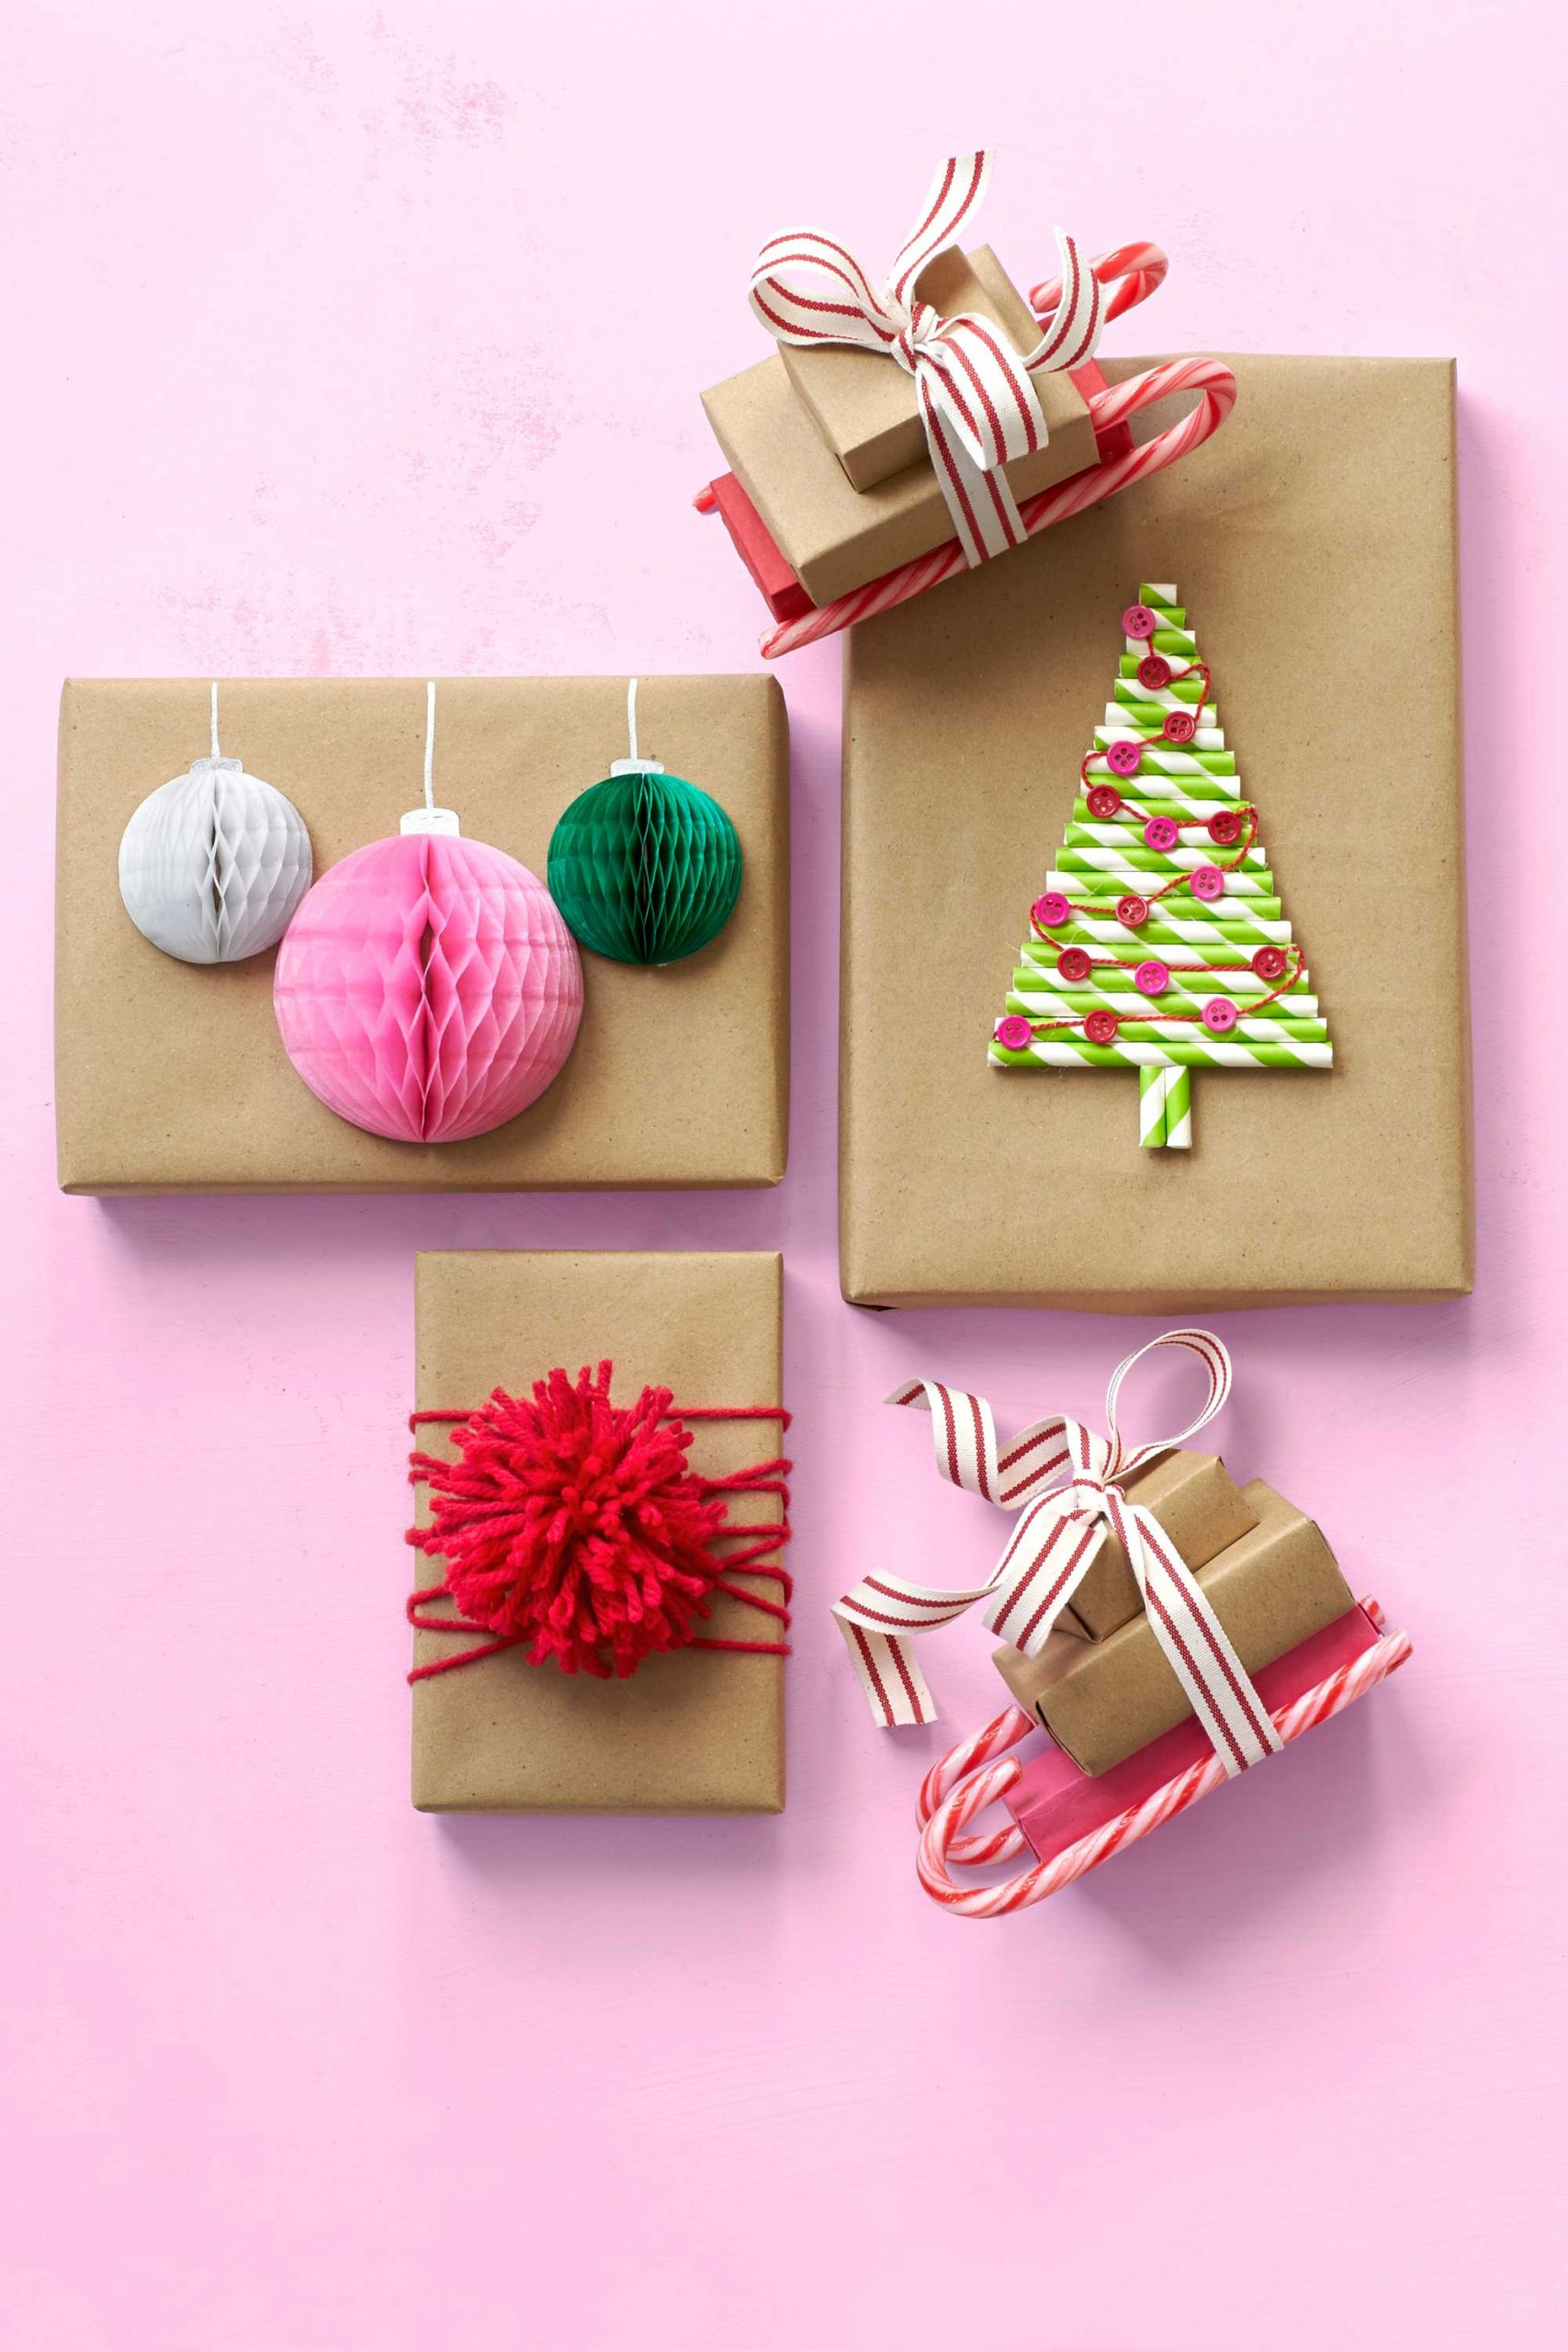 Holiday Gift Crafts Ideas
 30 Unique Gift Wrapping Ideas for Christmas How to Wrap